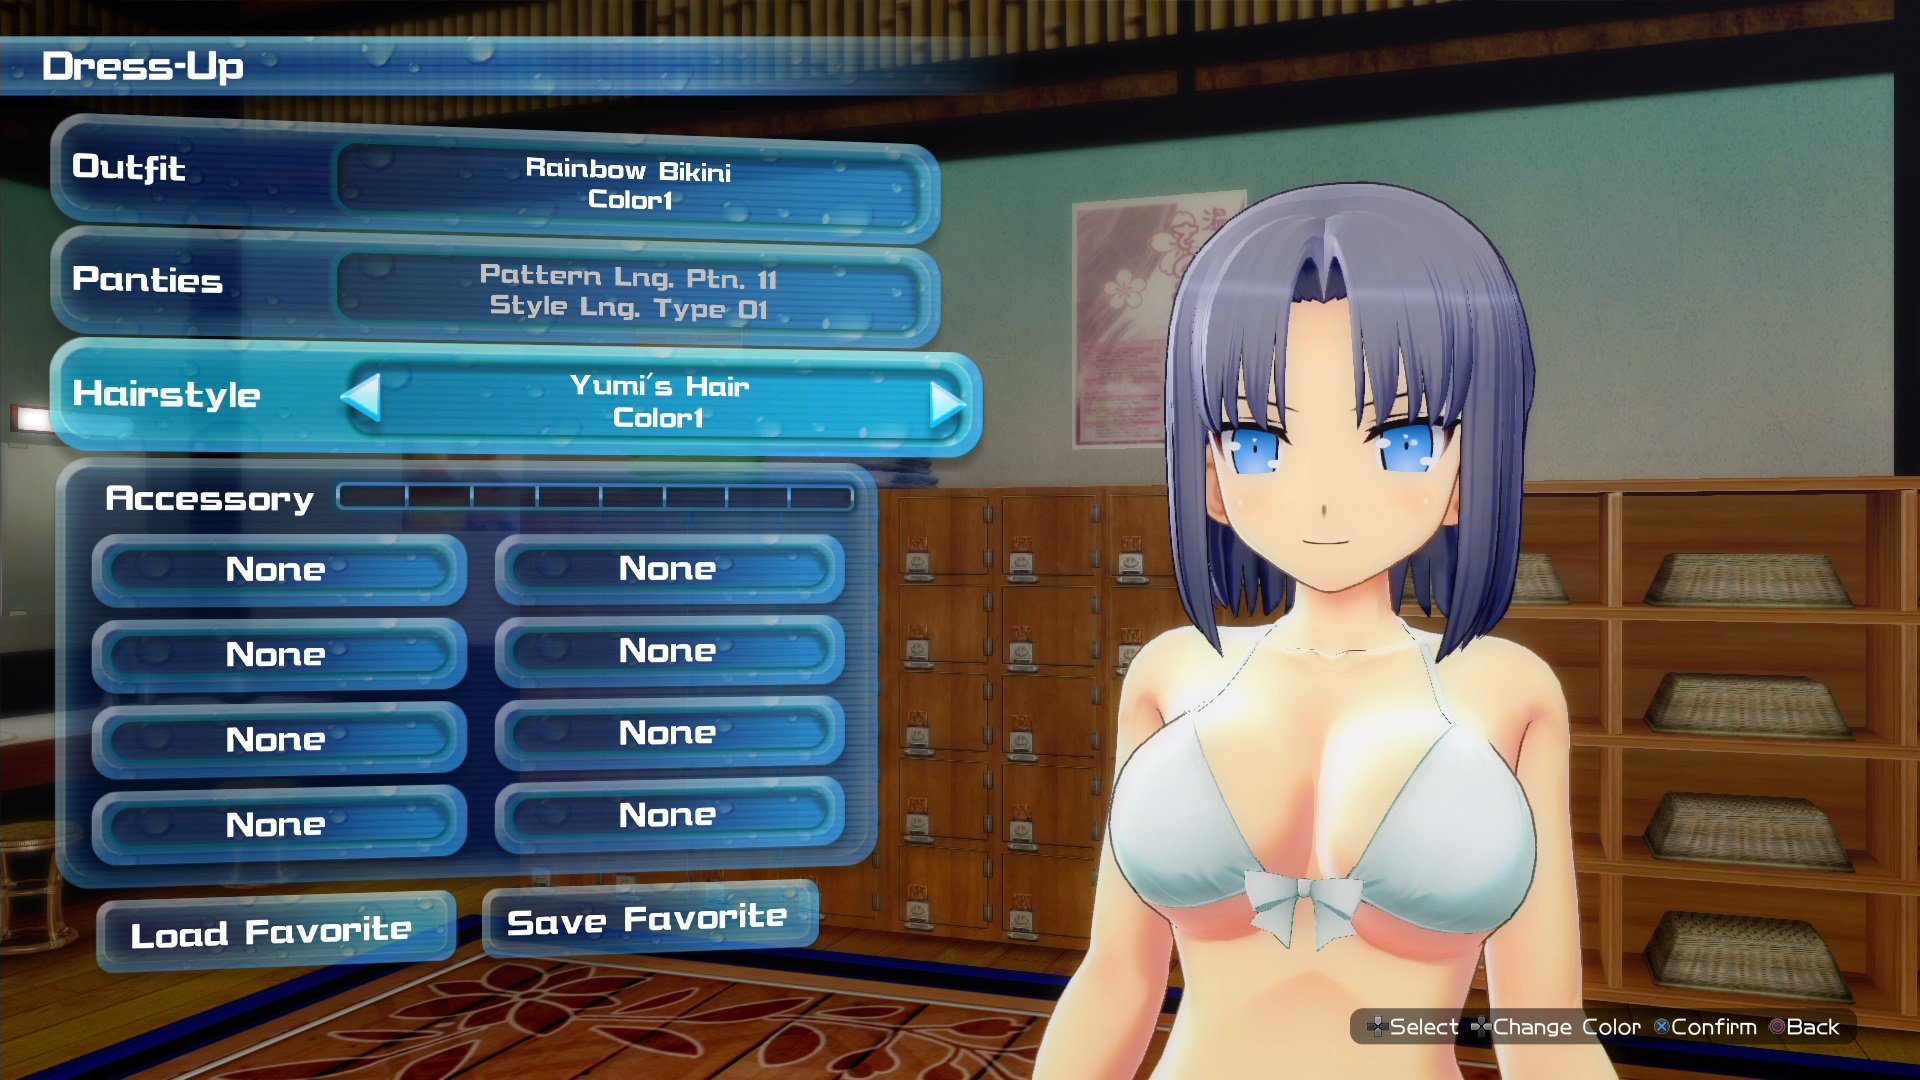 Marvelous Europe no Twitter: "Did you know in KAGURA Peach Beach Splash you destroy a character's costume in the Intimacy Mode of the Dressing Room by activating the and